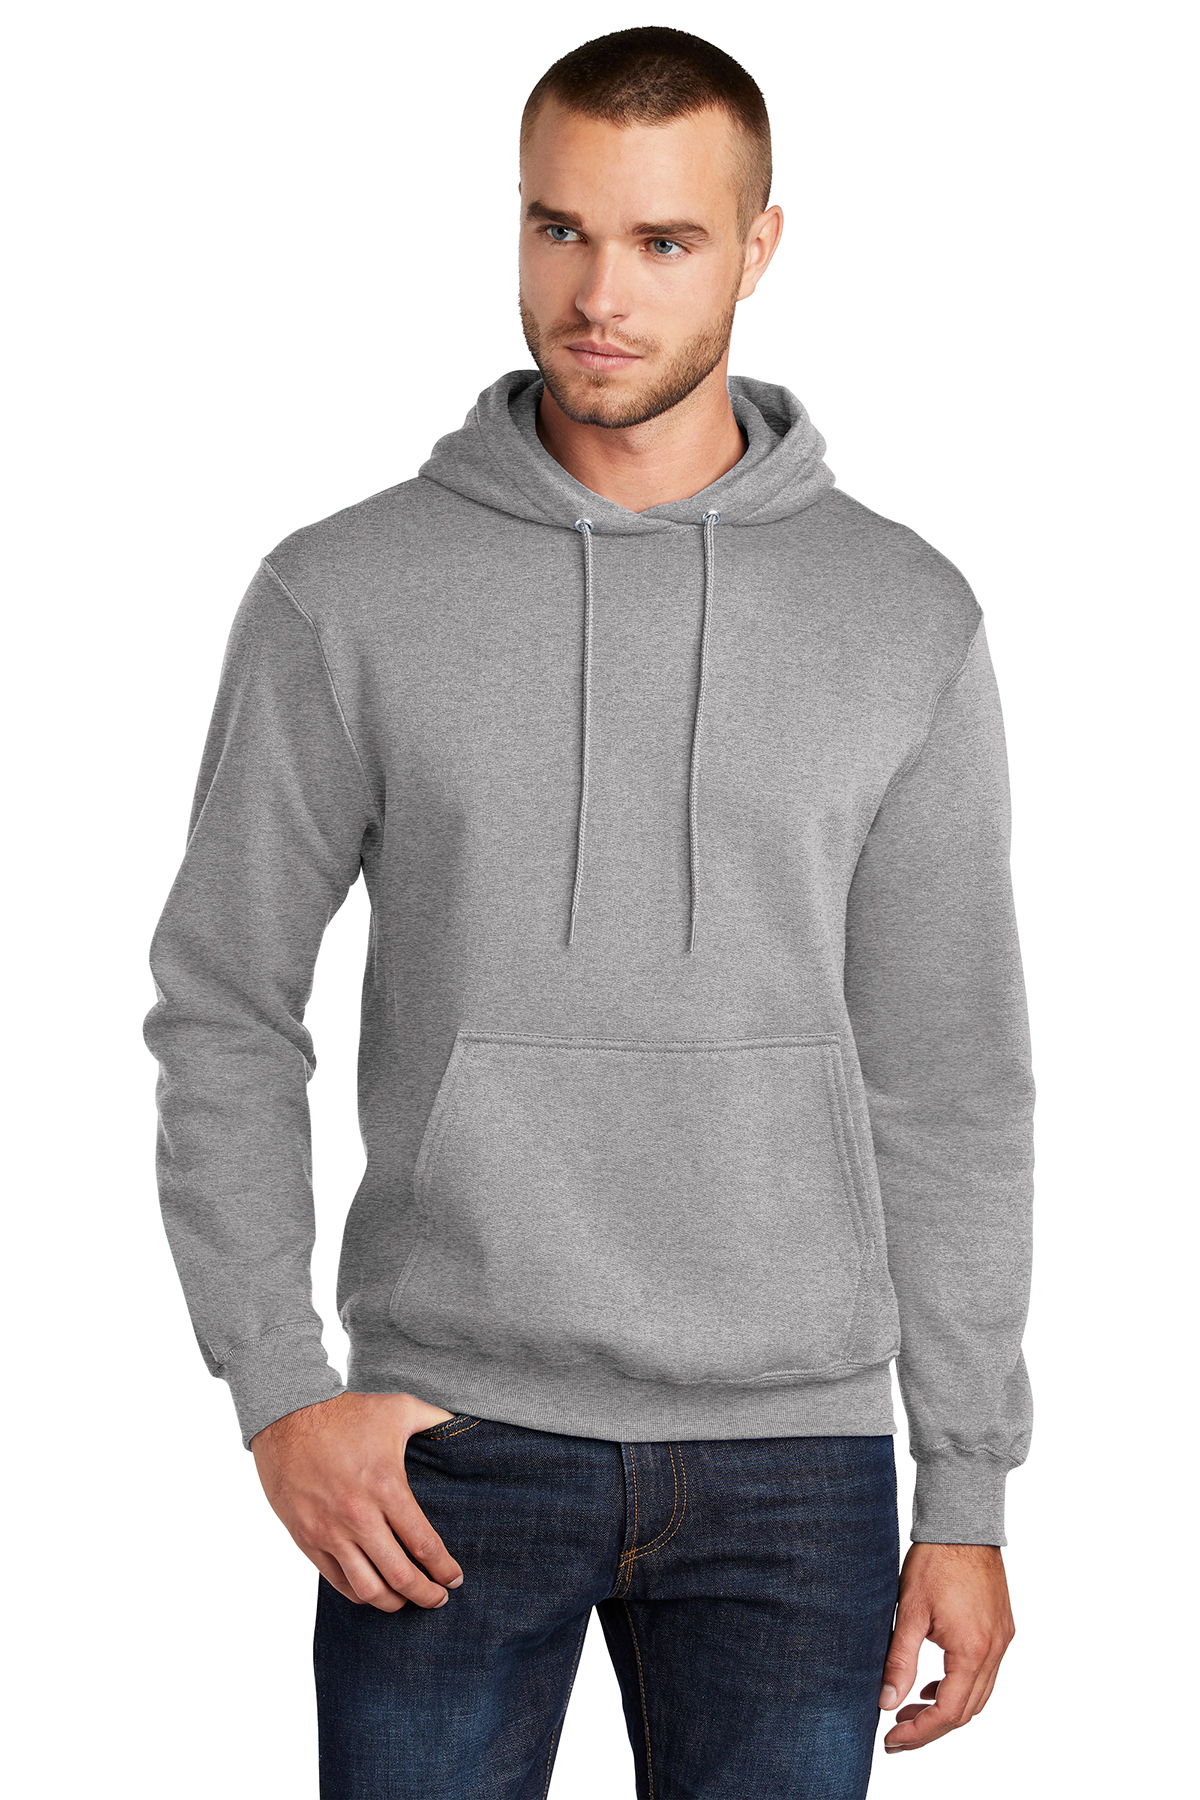 Mens Classic Pullover Hooded Sweatshirt Port & Co